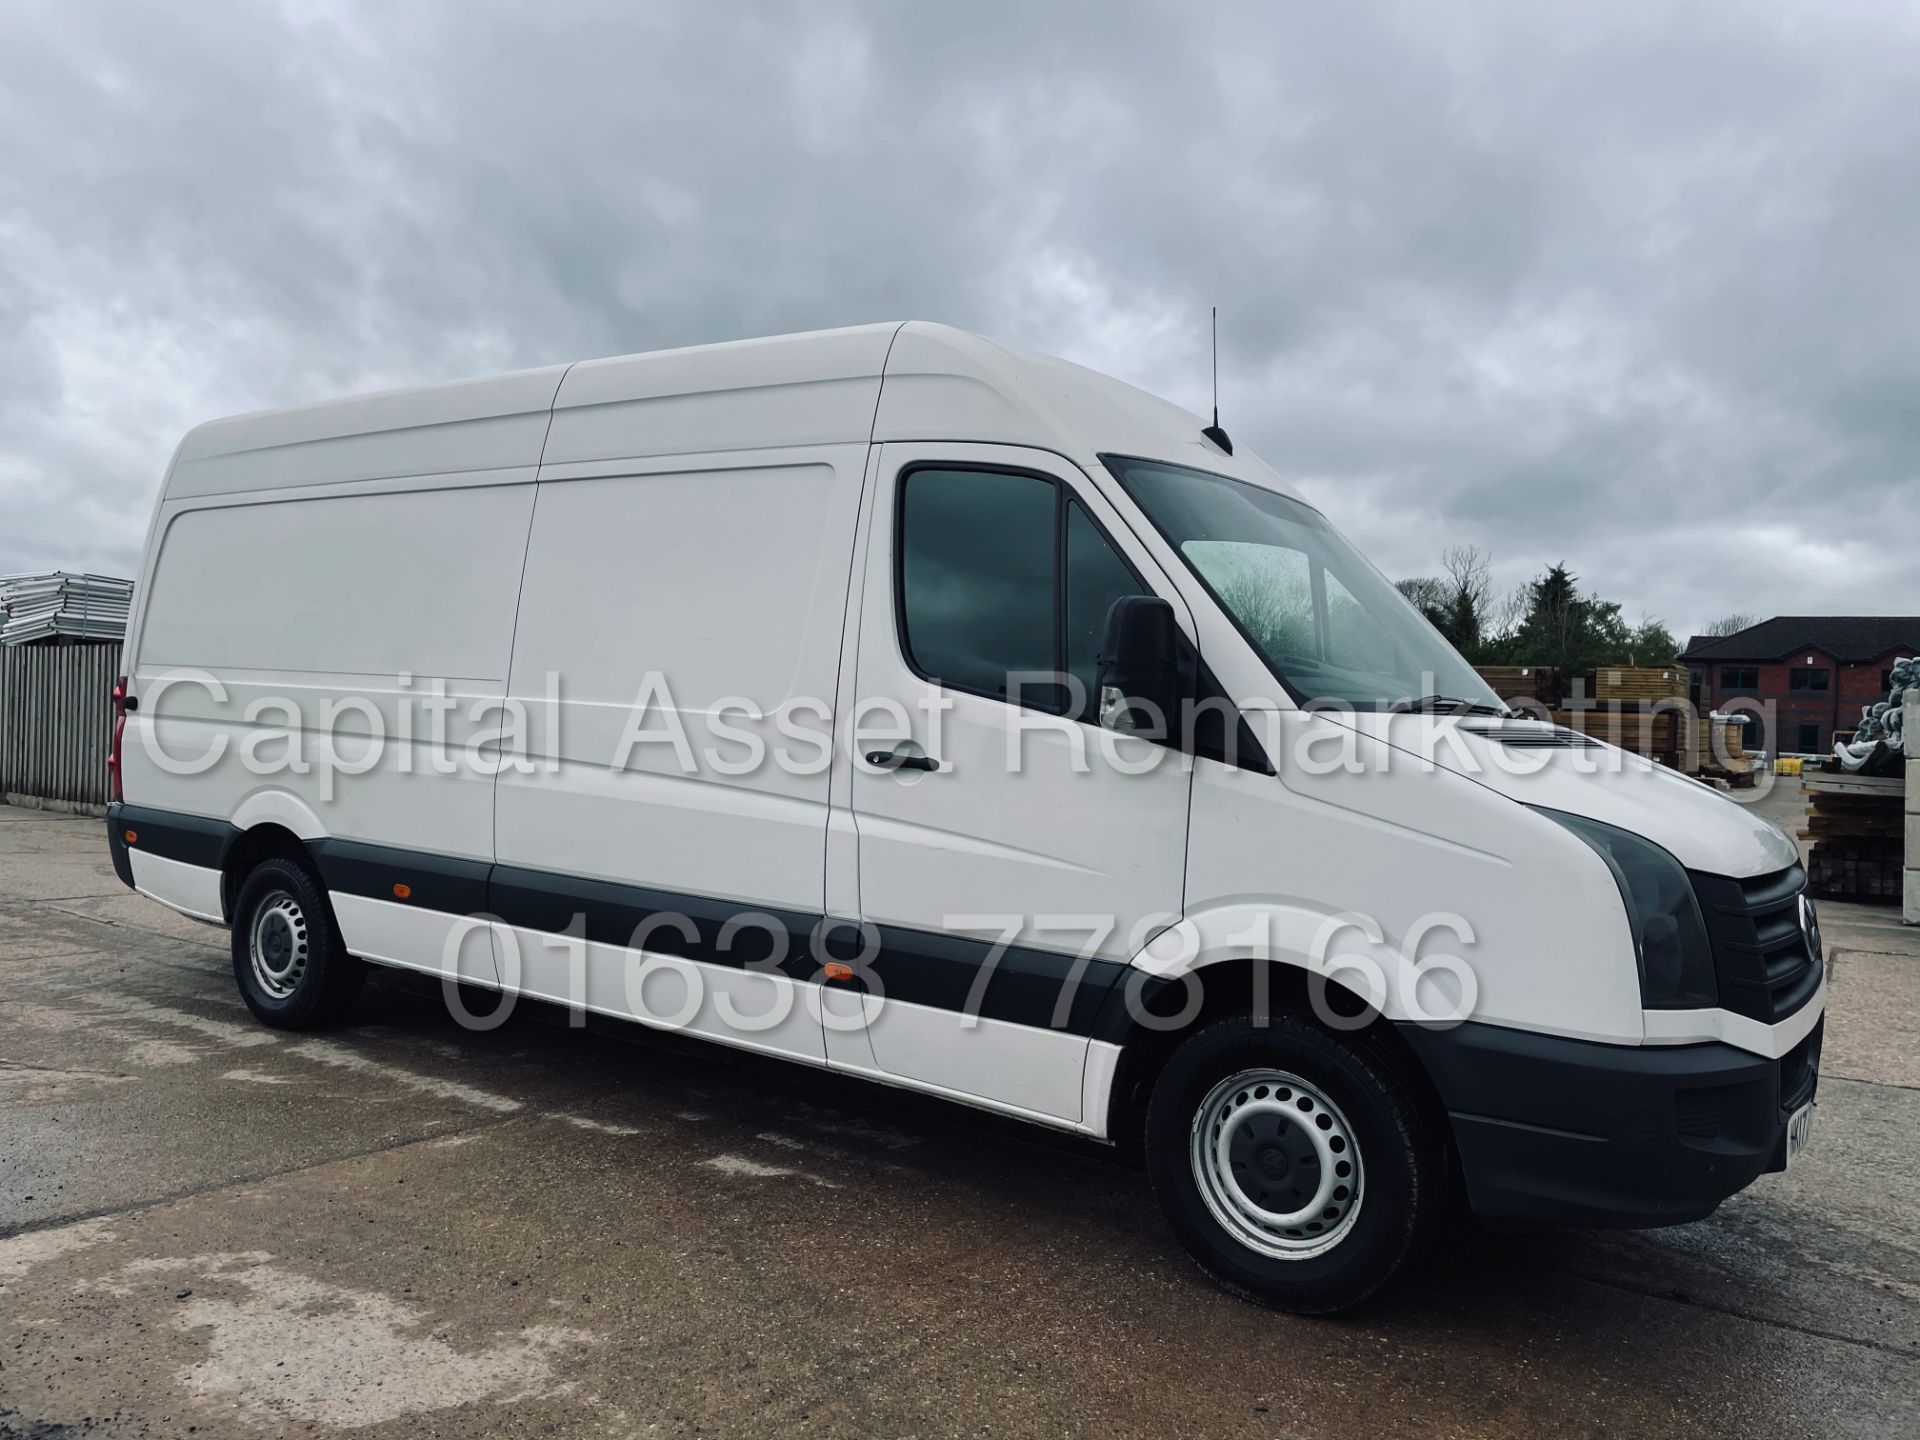 (On Sale) VOLKSWAGEN CRAFTER *LWB HI-ROOF* (2017 - EURO 6) '2.0 TDI BMT - 6 SPEED' *CRUISE CONTROL*